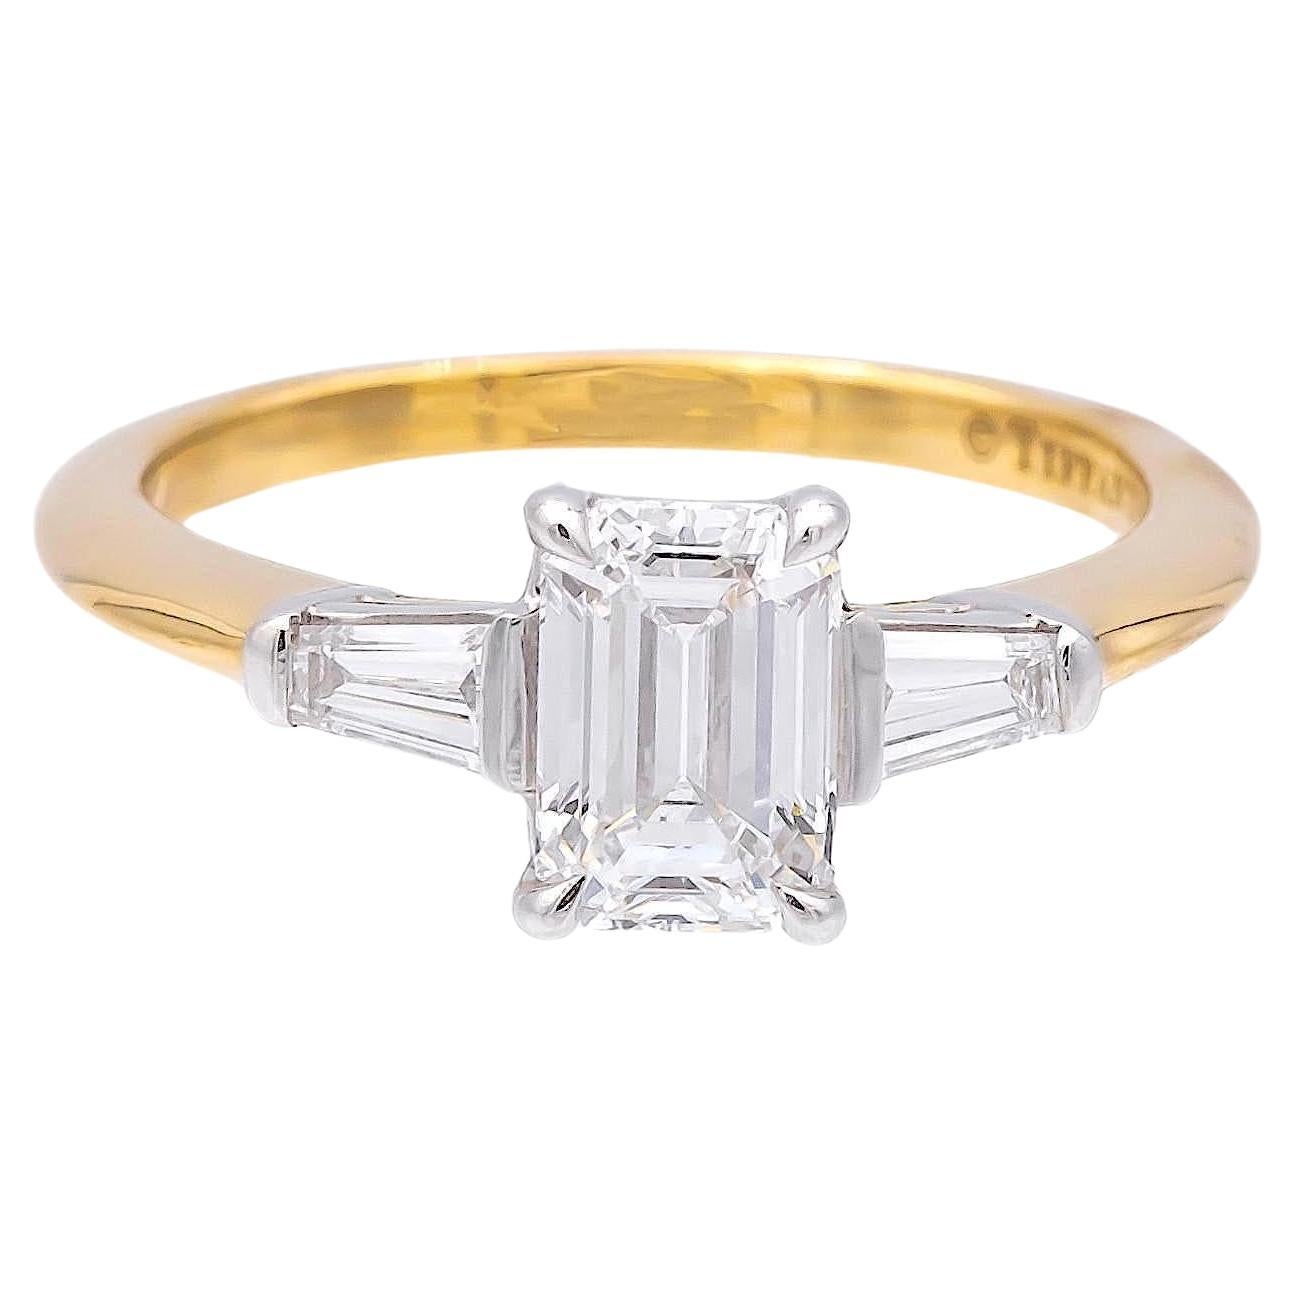 Tiffany & Co. 18K Yellow Gold Plat Emerald Cut Engagement Ring 1.16ct TW EVVS2 For Sale